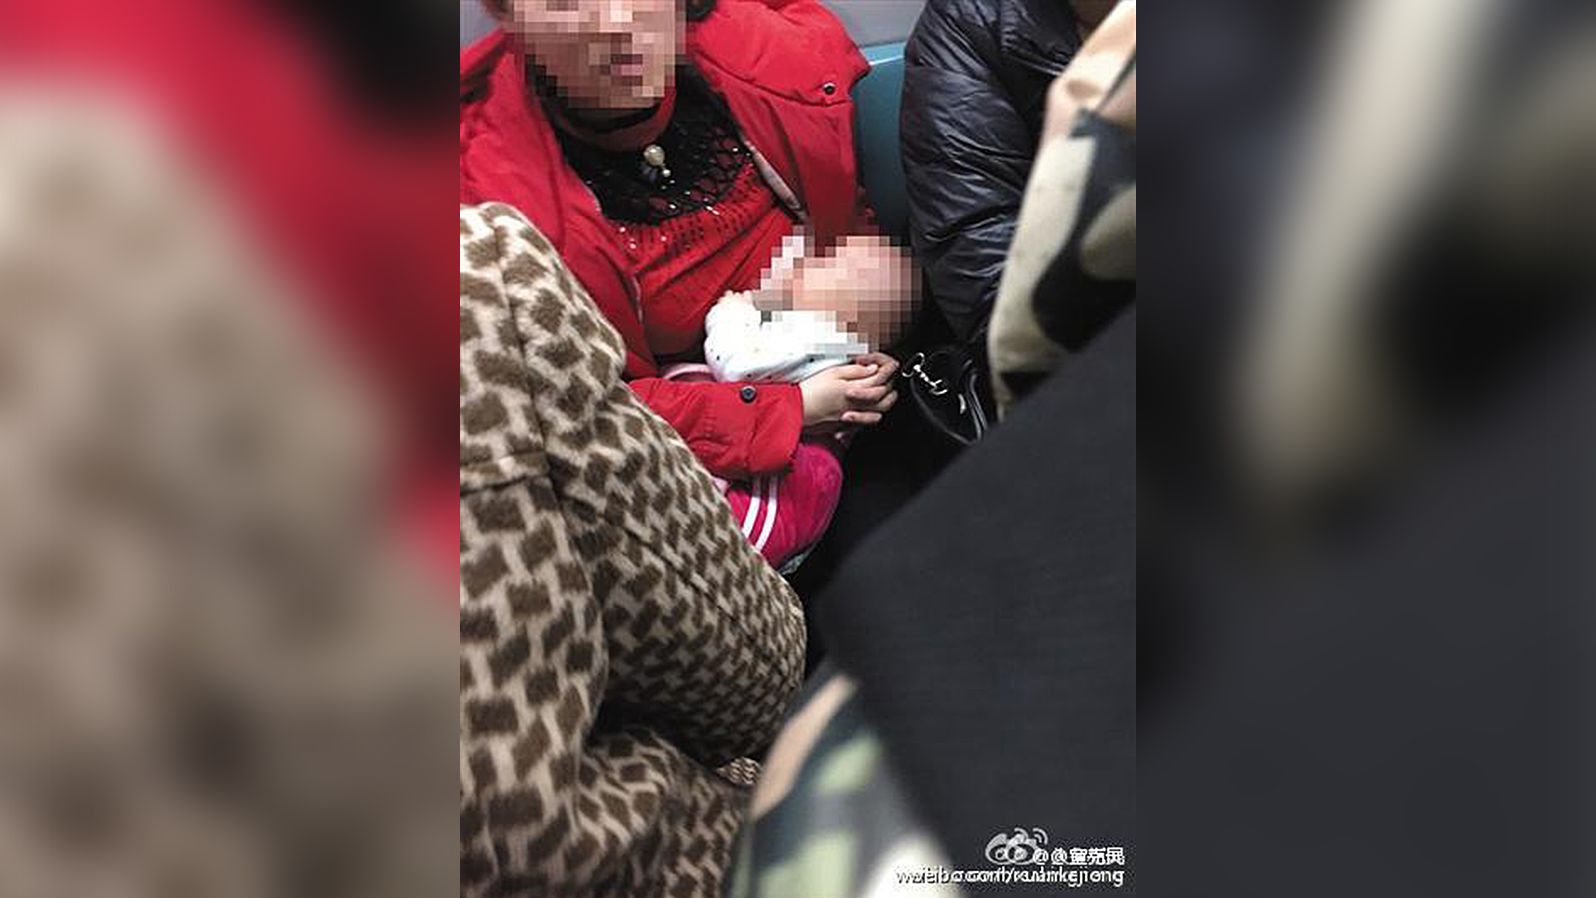 This image of a woman breastfeeding her baby on a crowded Beijing subway has been widely shared on Chinese social media site Weibo.